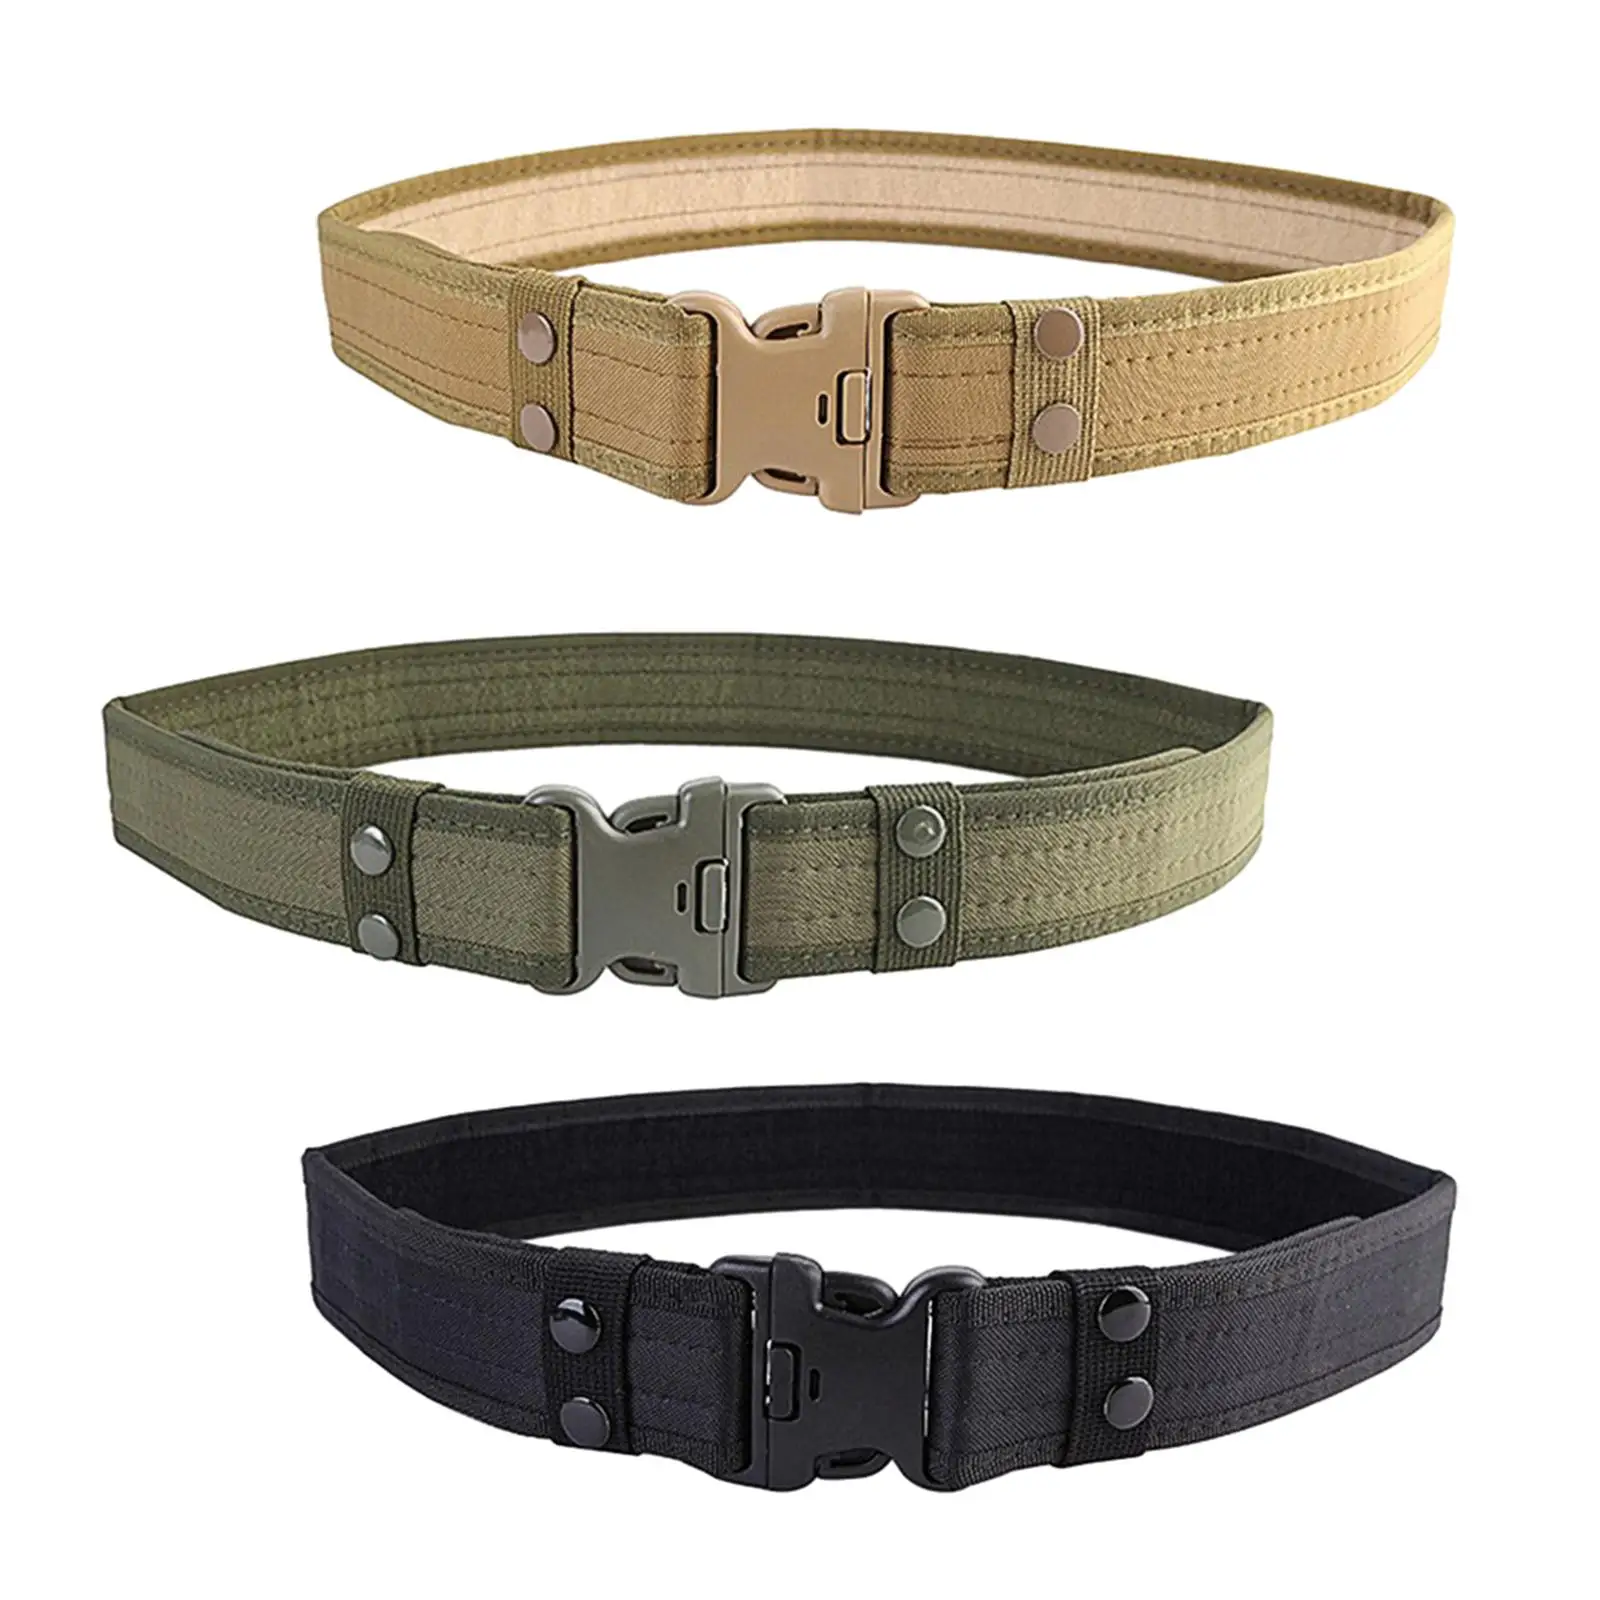 Men`s Outdoor Belts Wear Resistant Utility Belt Adjustable Casual Waistband for Hunting Game Training Hiking Leisure Sports